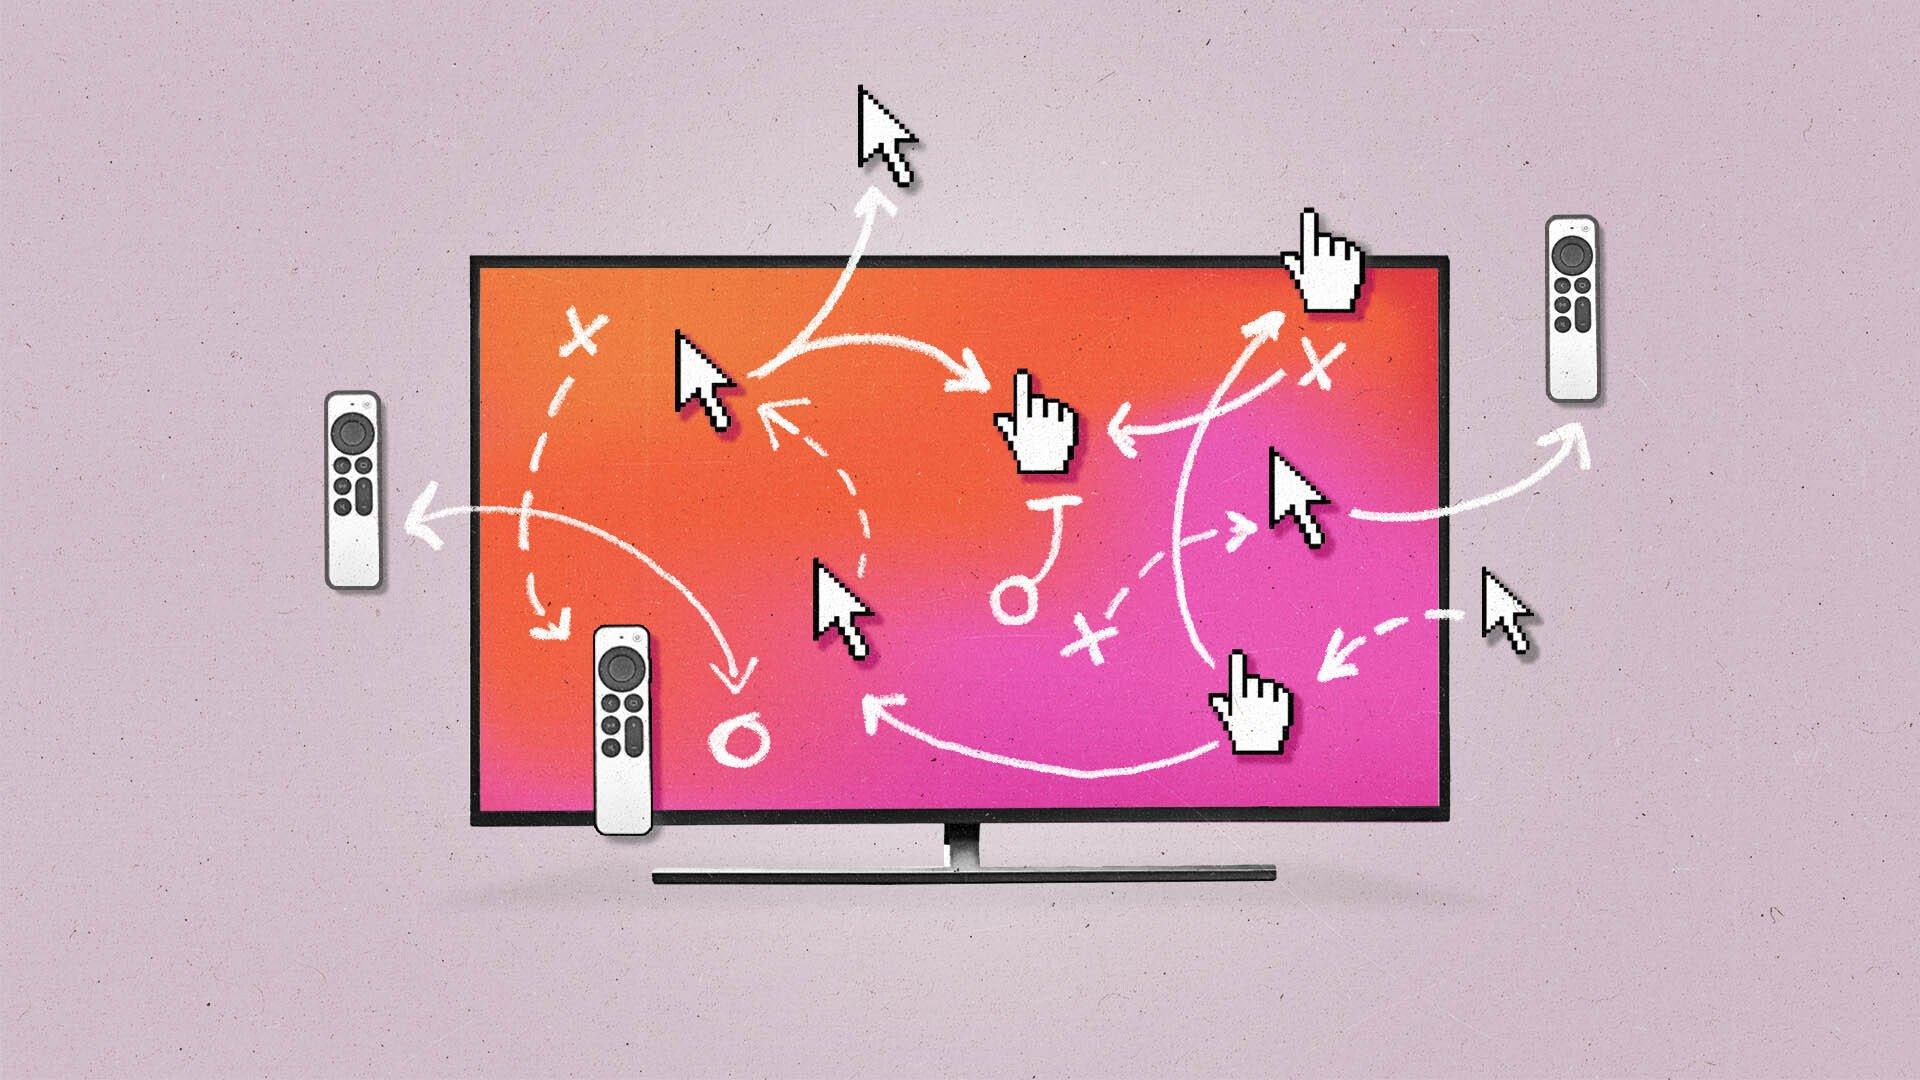 A strategy play illustration emerging from an orange and pink television screen amidst floating mouse cursor and CTV remote icons